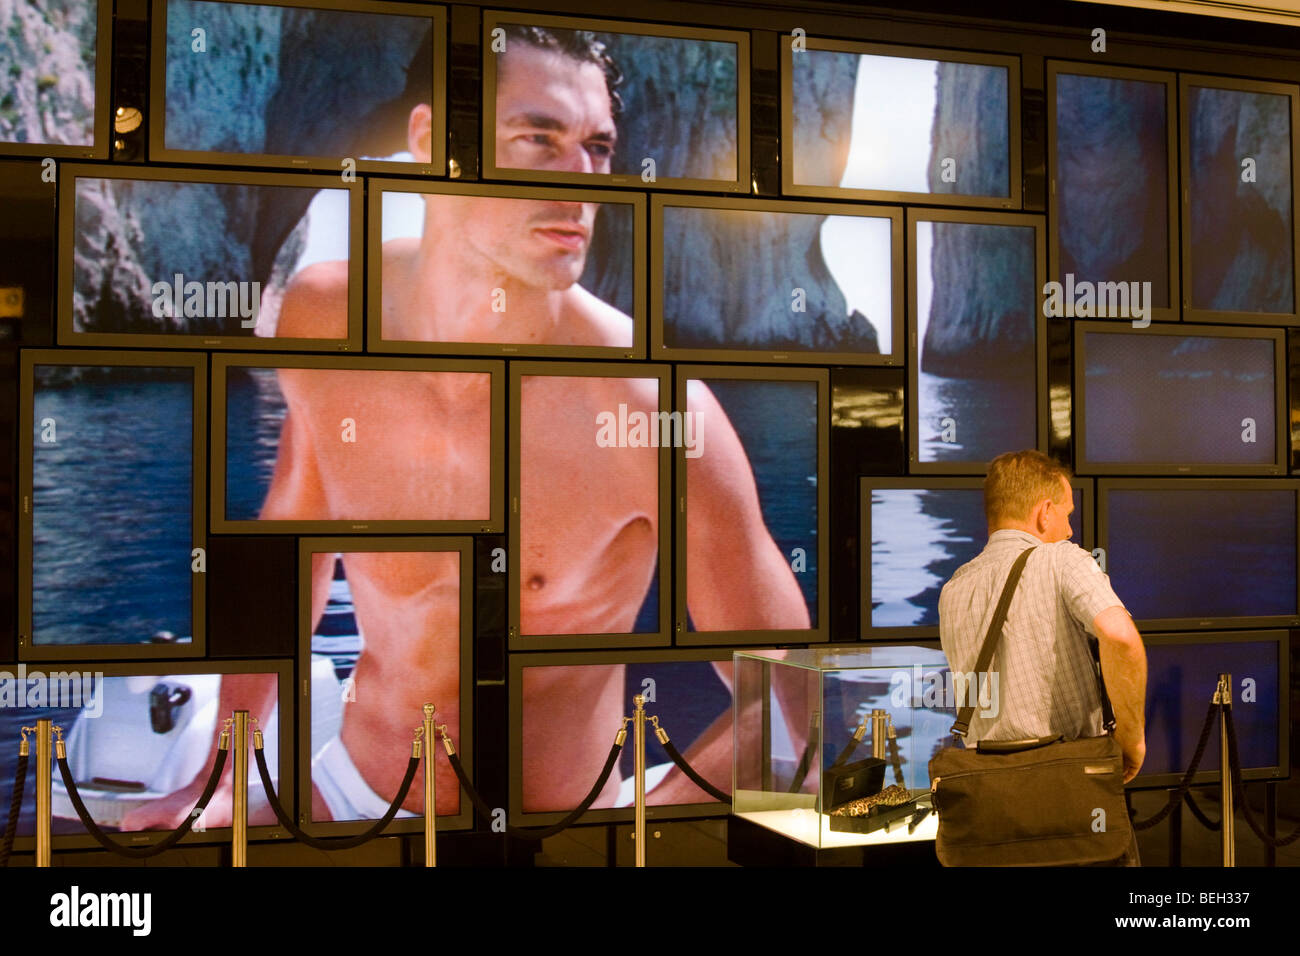 Fragrance male model advertising images on screen matrix at World of Duty Free at Heathrow's Terminal 5. Stock Photo